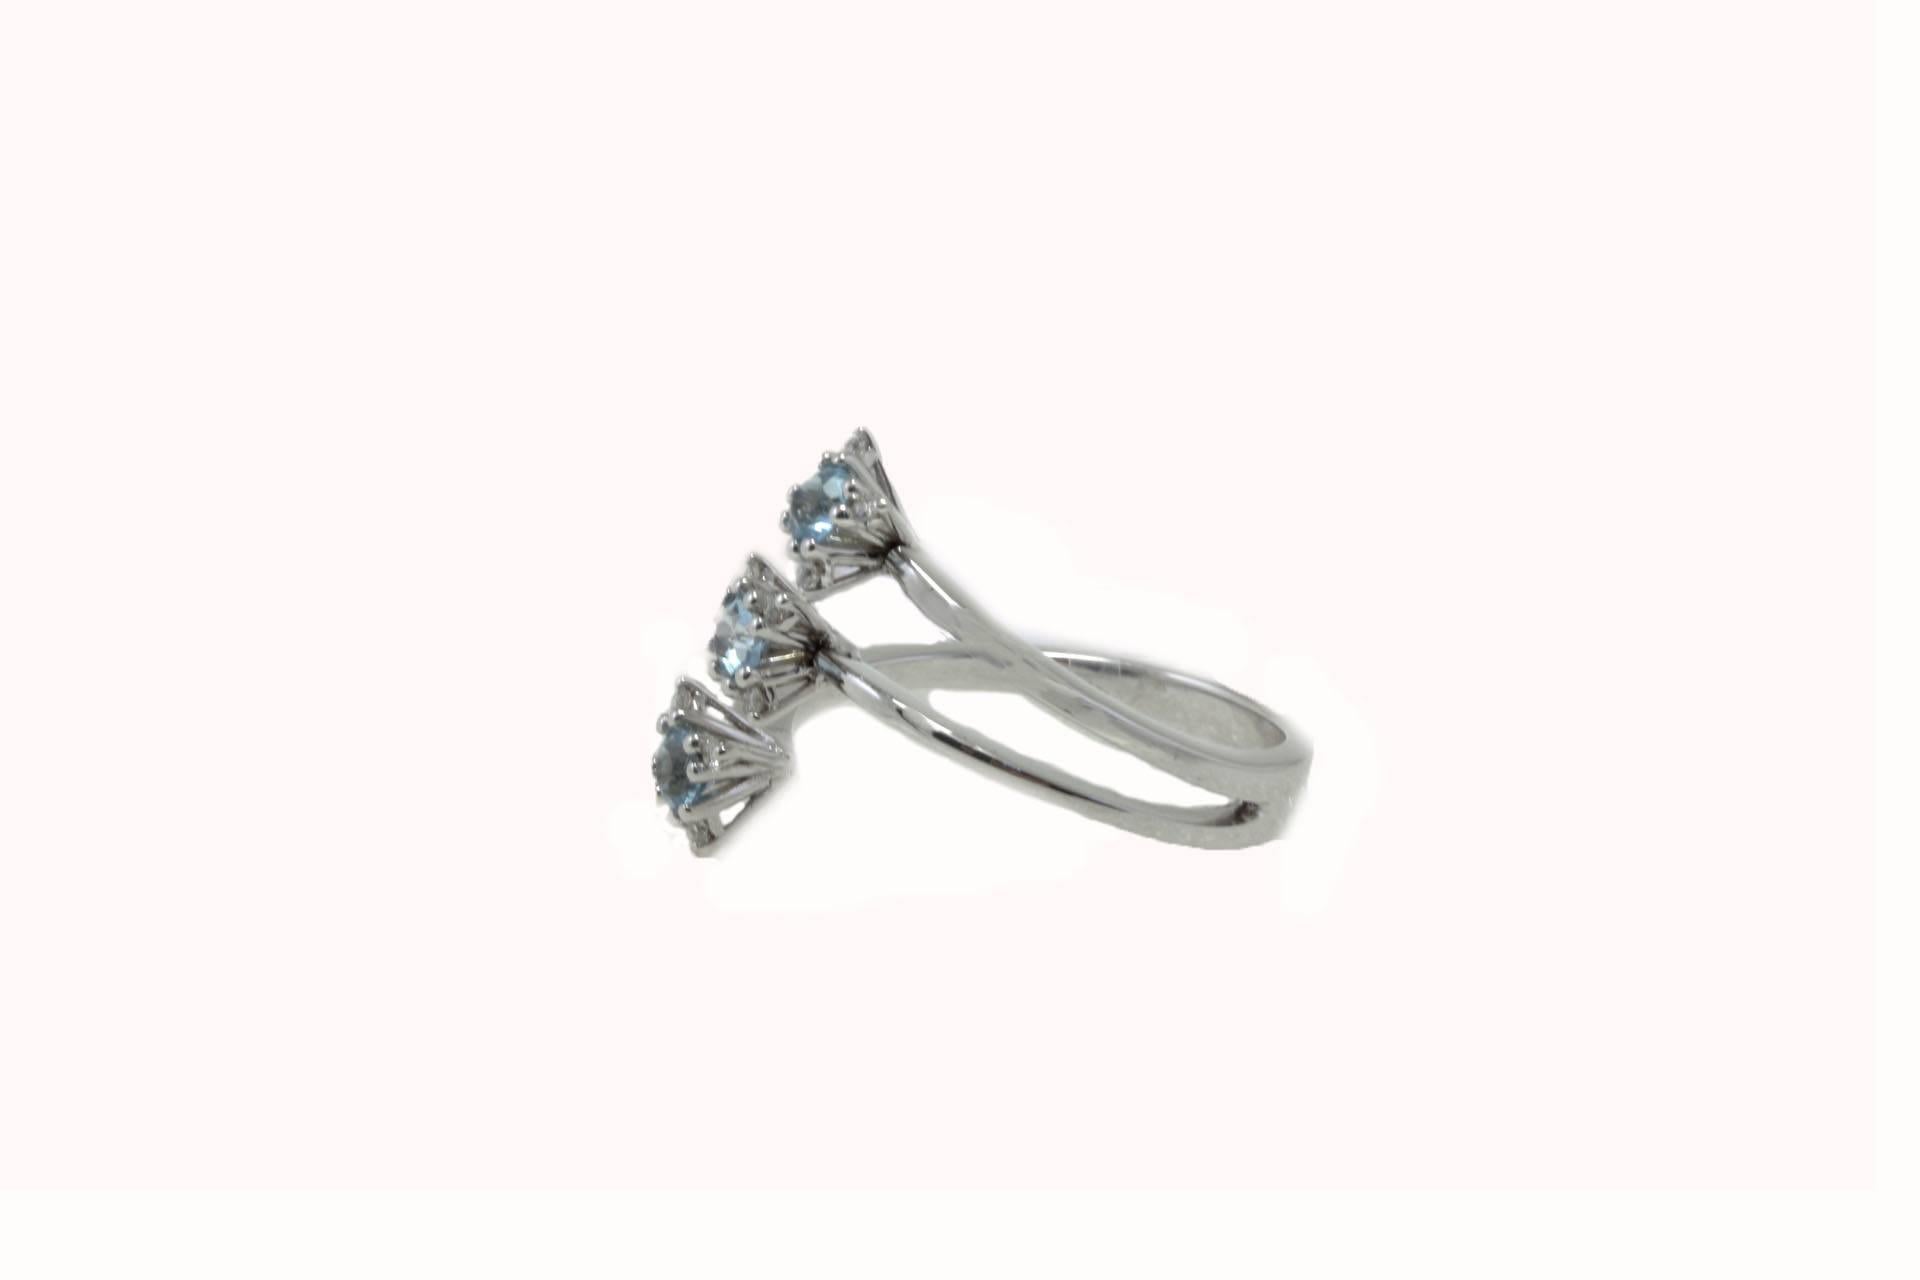 Elegant design with these 3 shiny aquamarines and diamonds stars. All is mounted in 18 Kt white gold.
Tot weight 4 g
Aquamarines 0.44 ct
Diamonds 0.11 ct
Ring Size ITA 15 - French 55 - US 7 - UK O

rf. gace